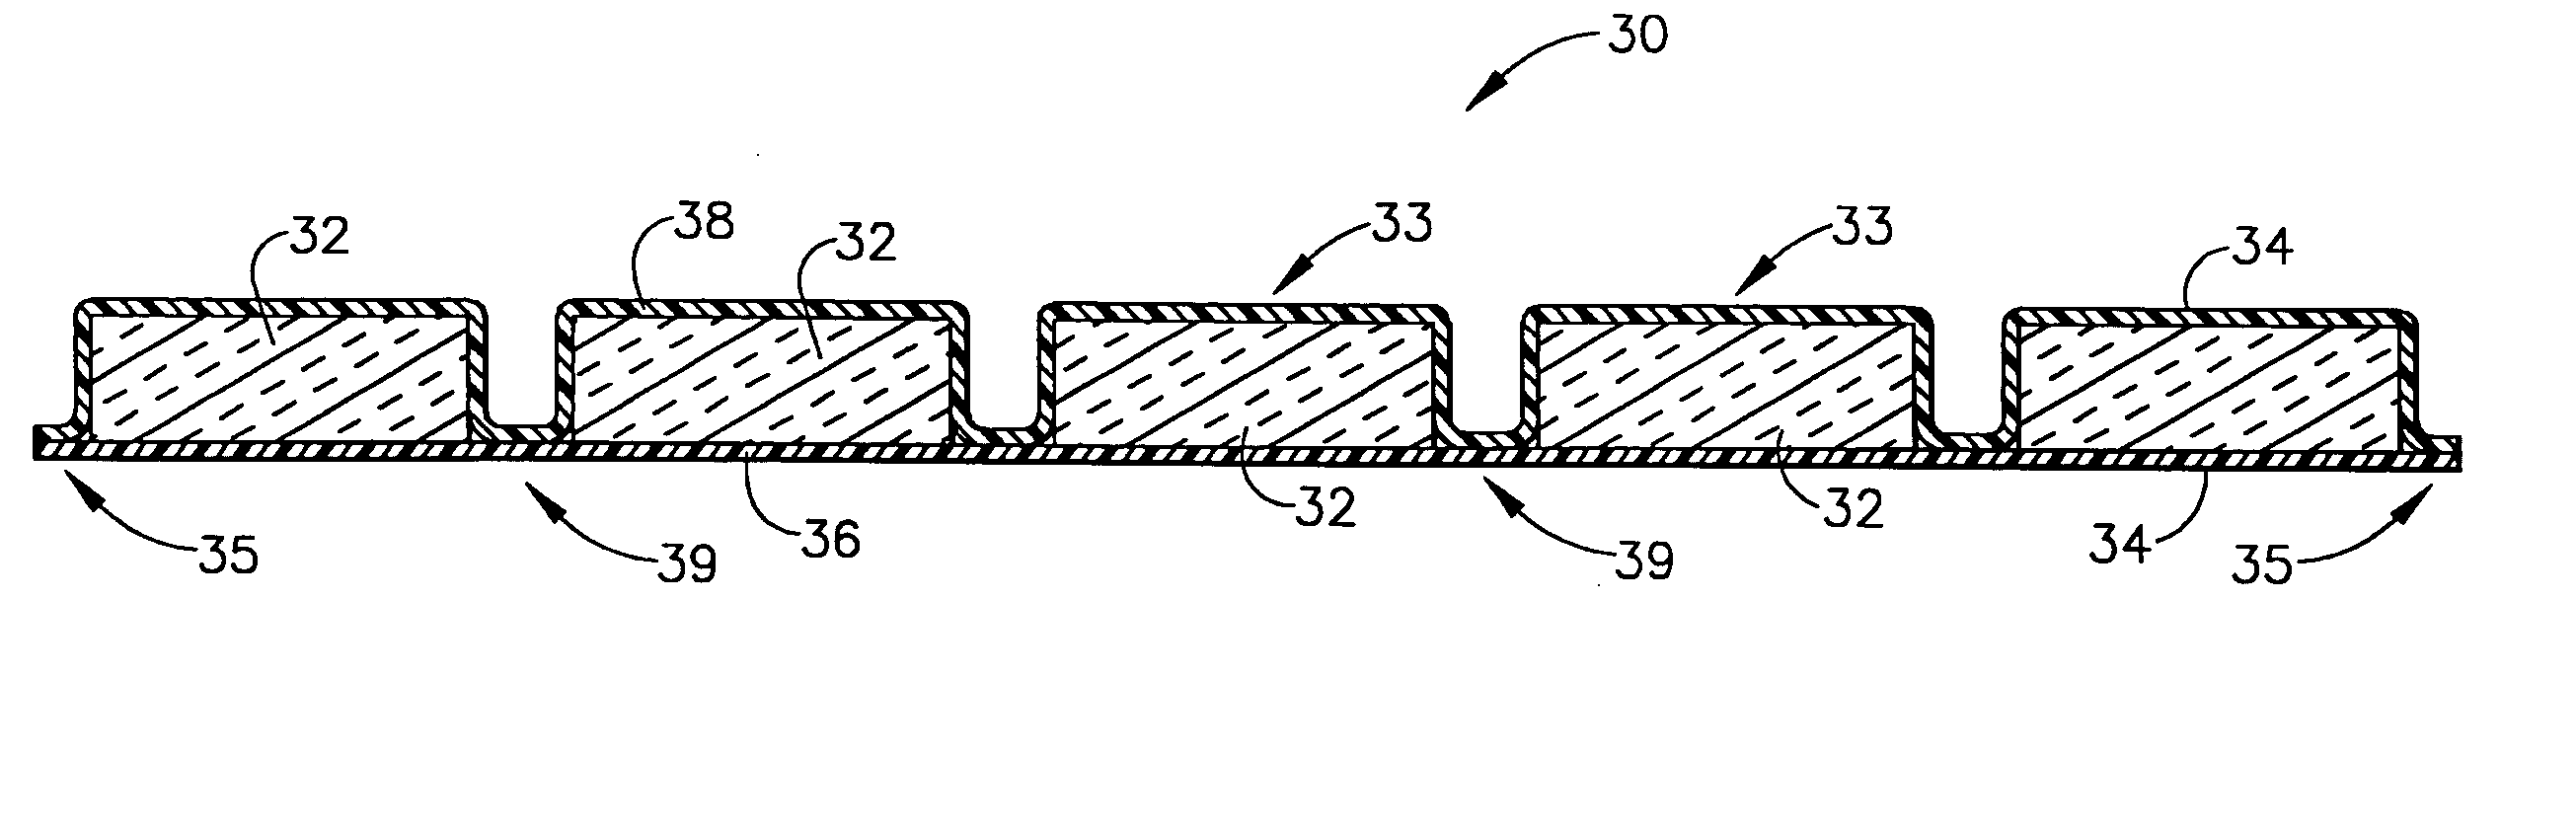 Modularized insulation, systems, apparatus, and methods